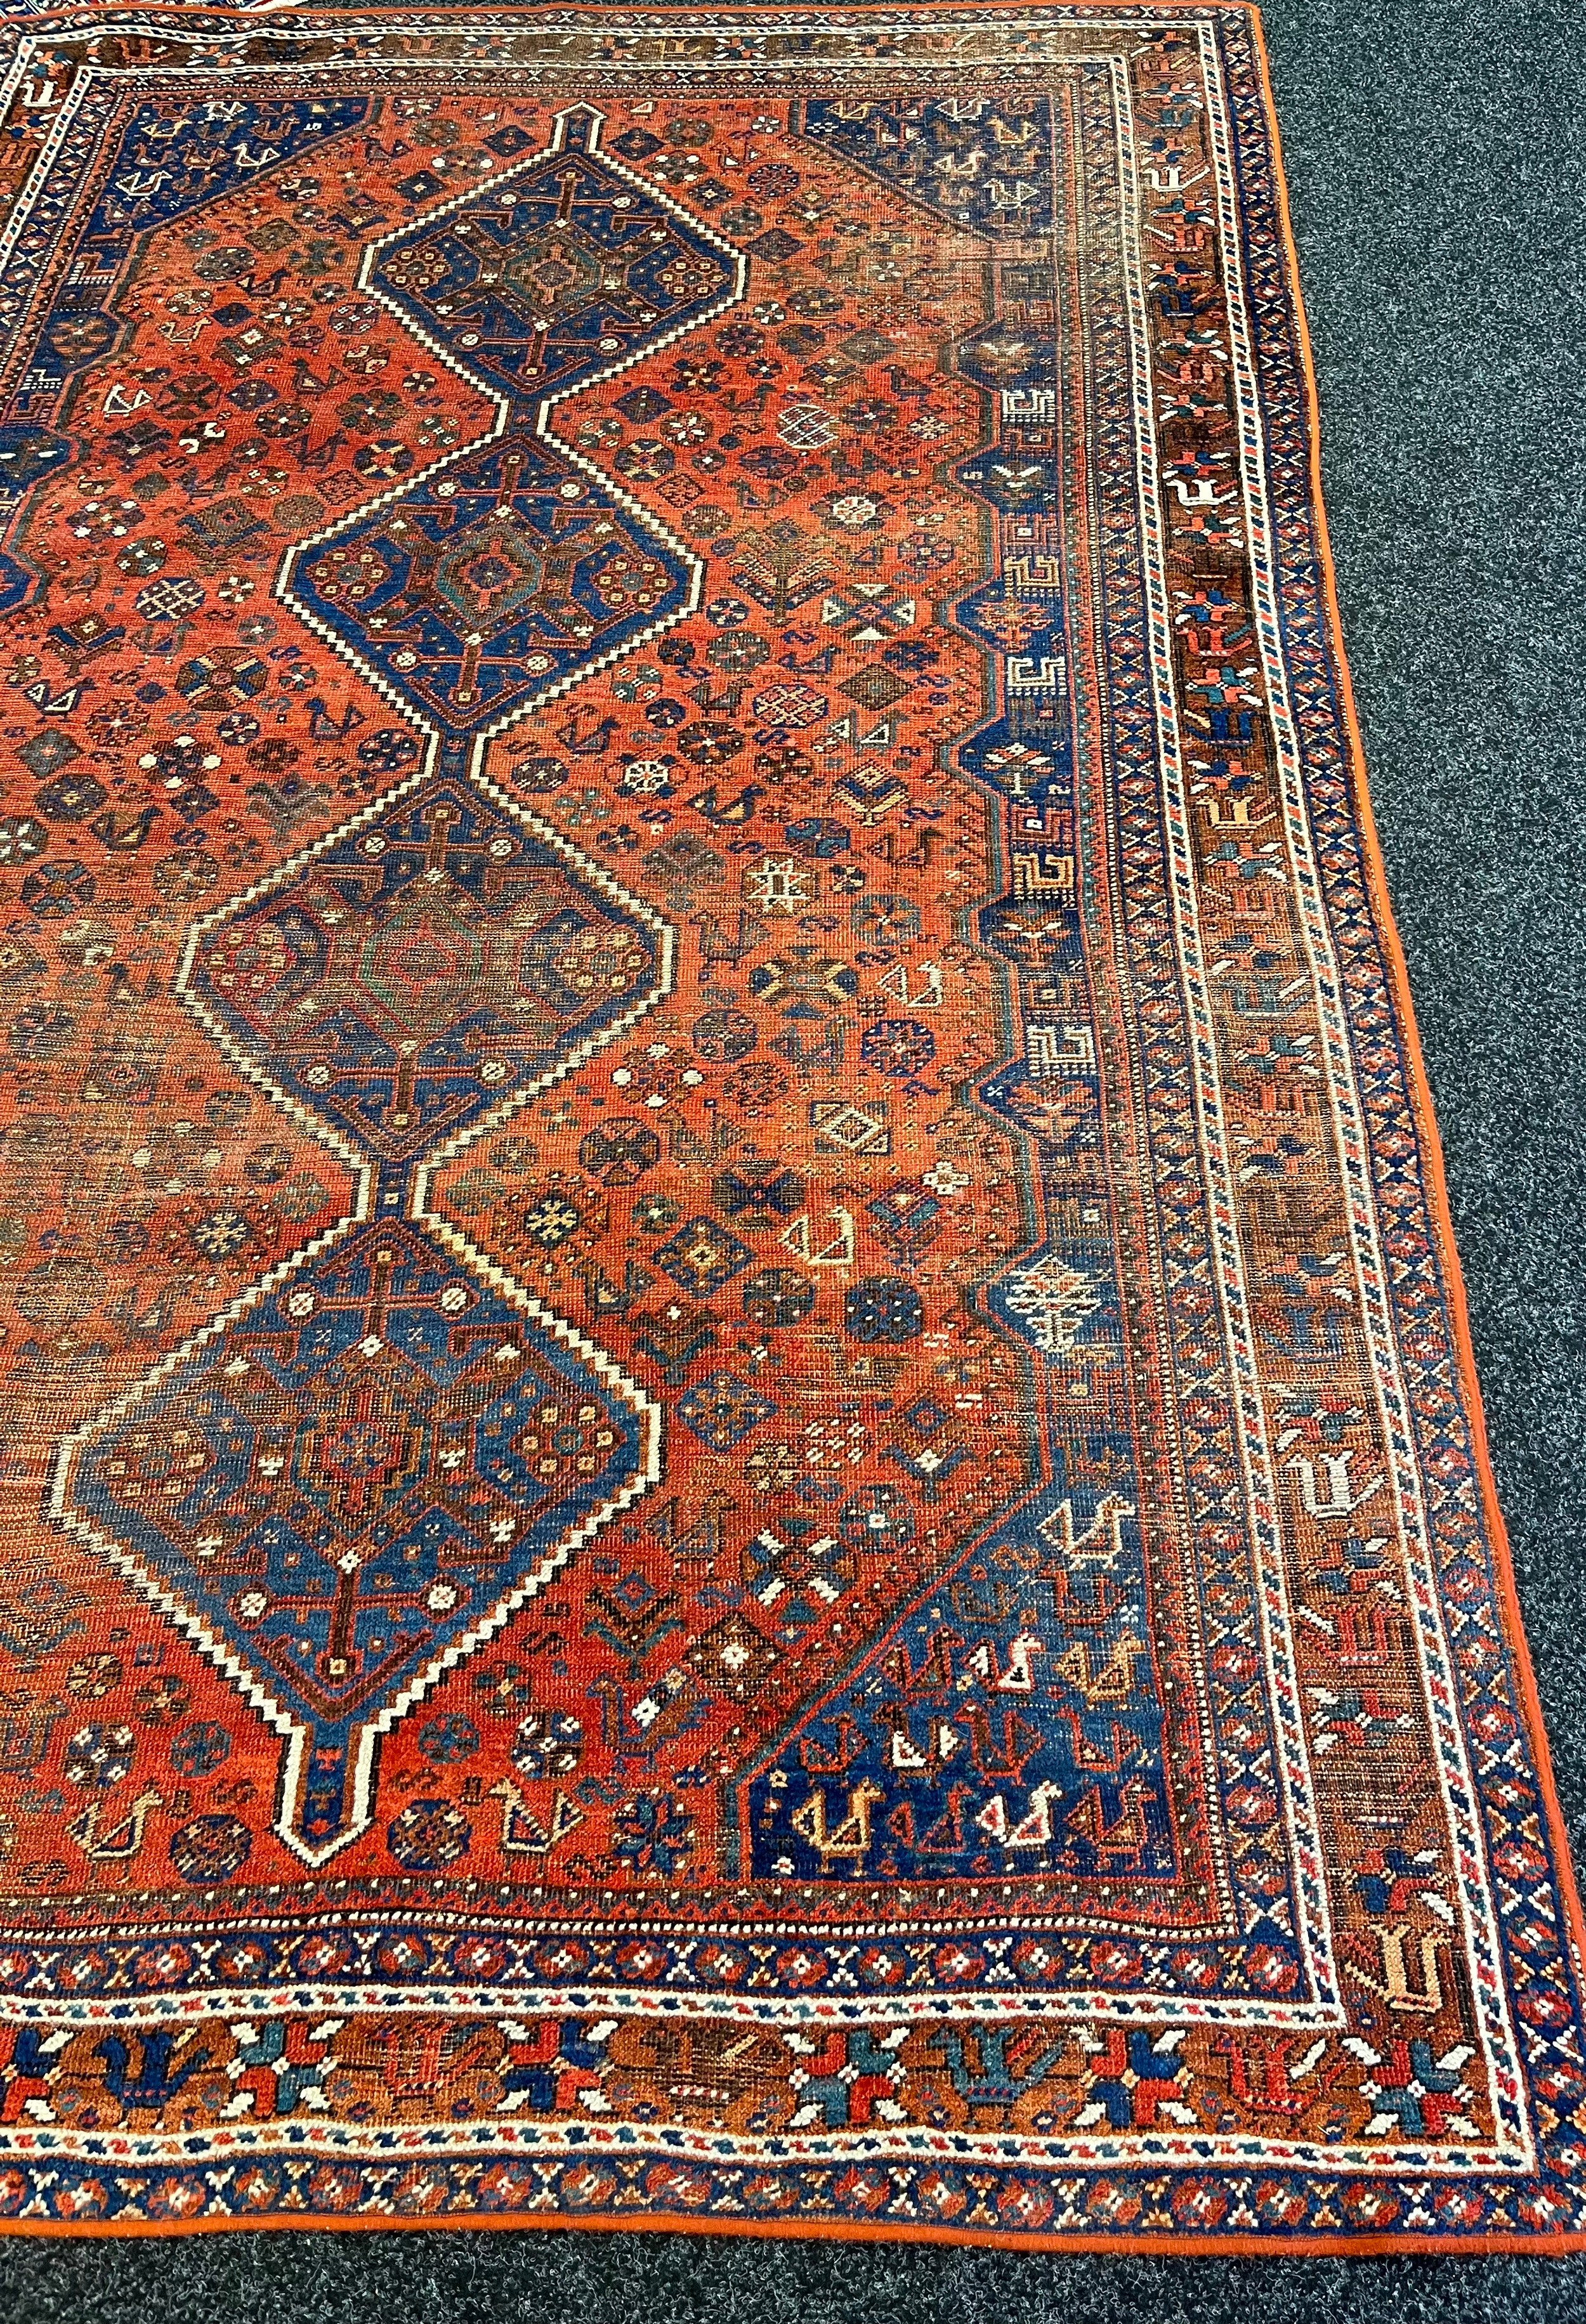 Provinz Gaschgai Iranian rug with certificate of authenticity [200x300cm] - Image 3 of 10